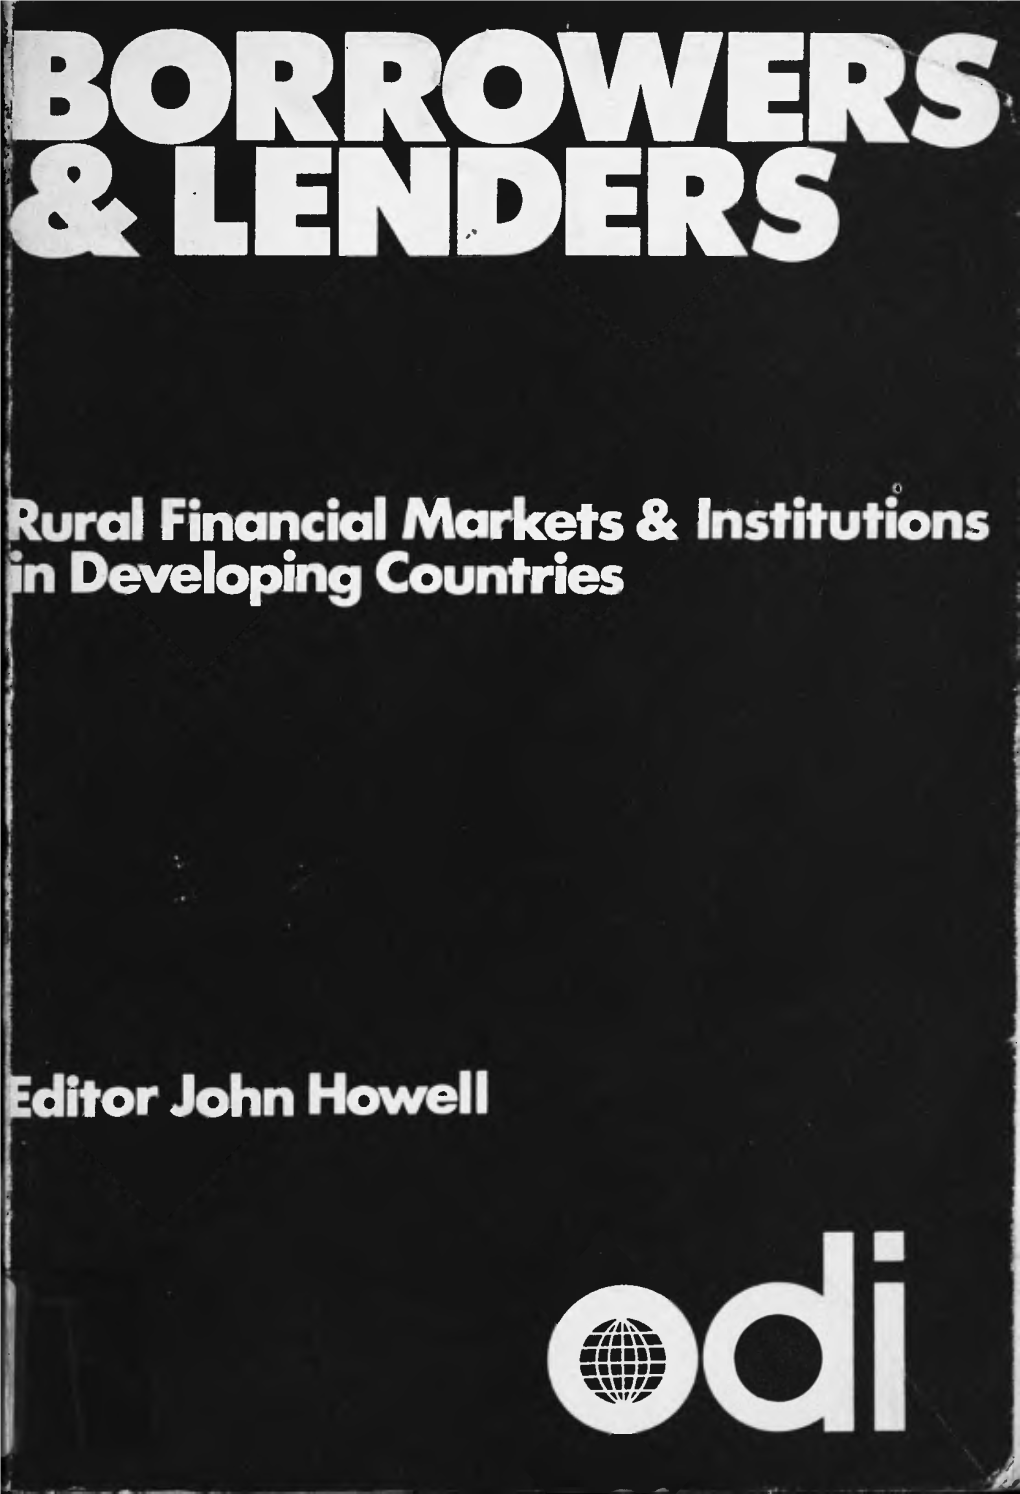 Borrowers and Landers: Rural Markets and Institutions in Developing